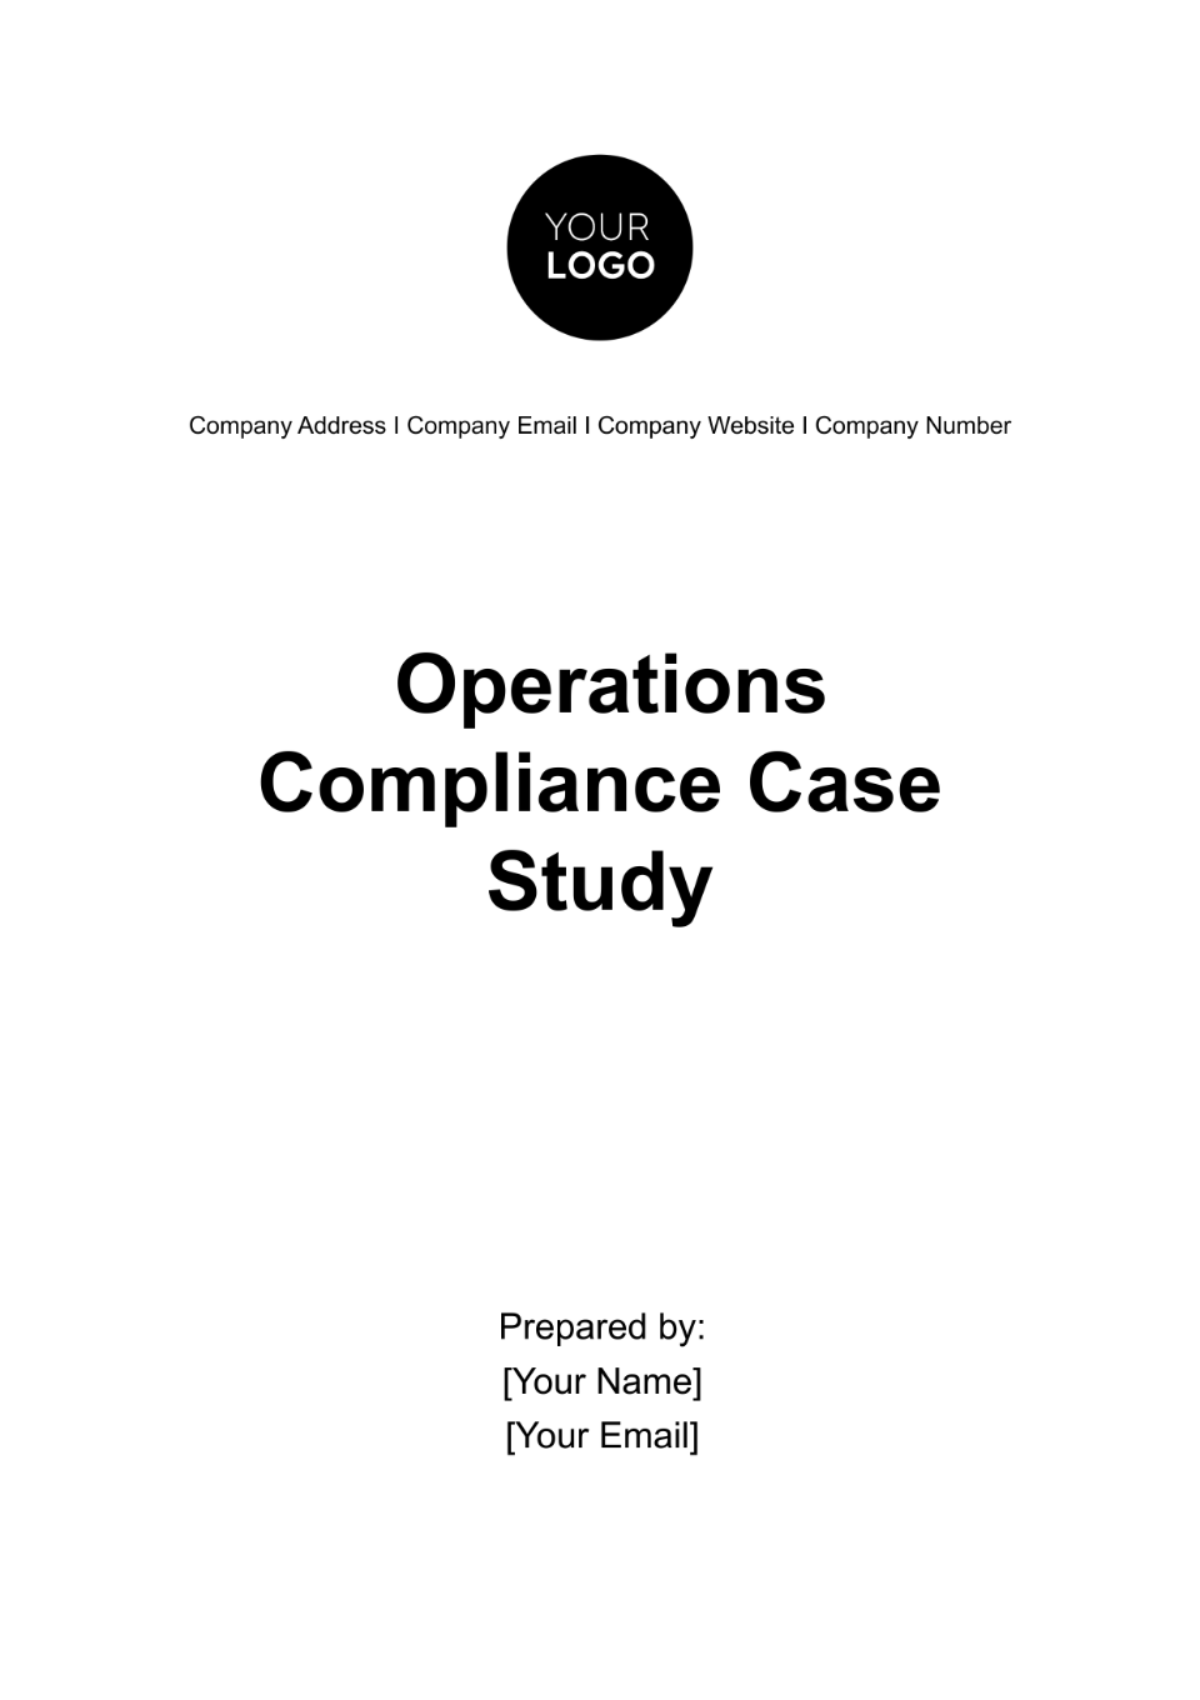 Operations Compliance Case Study Template